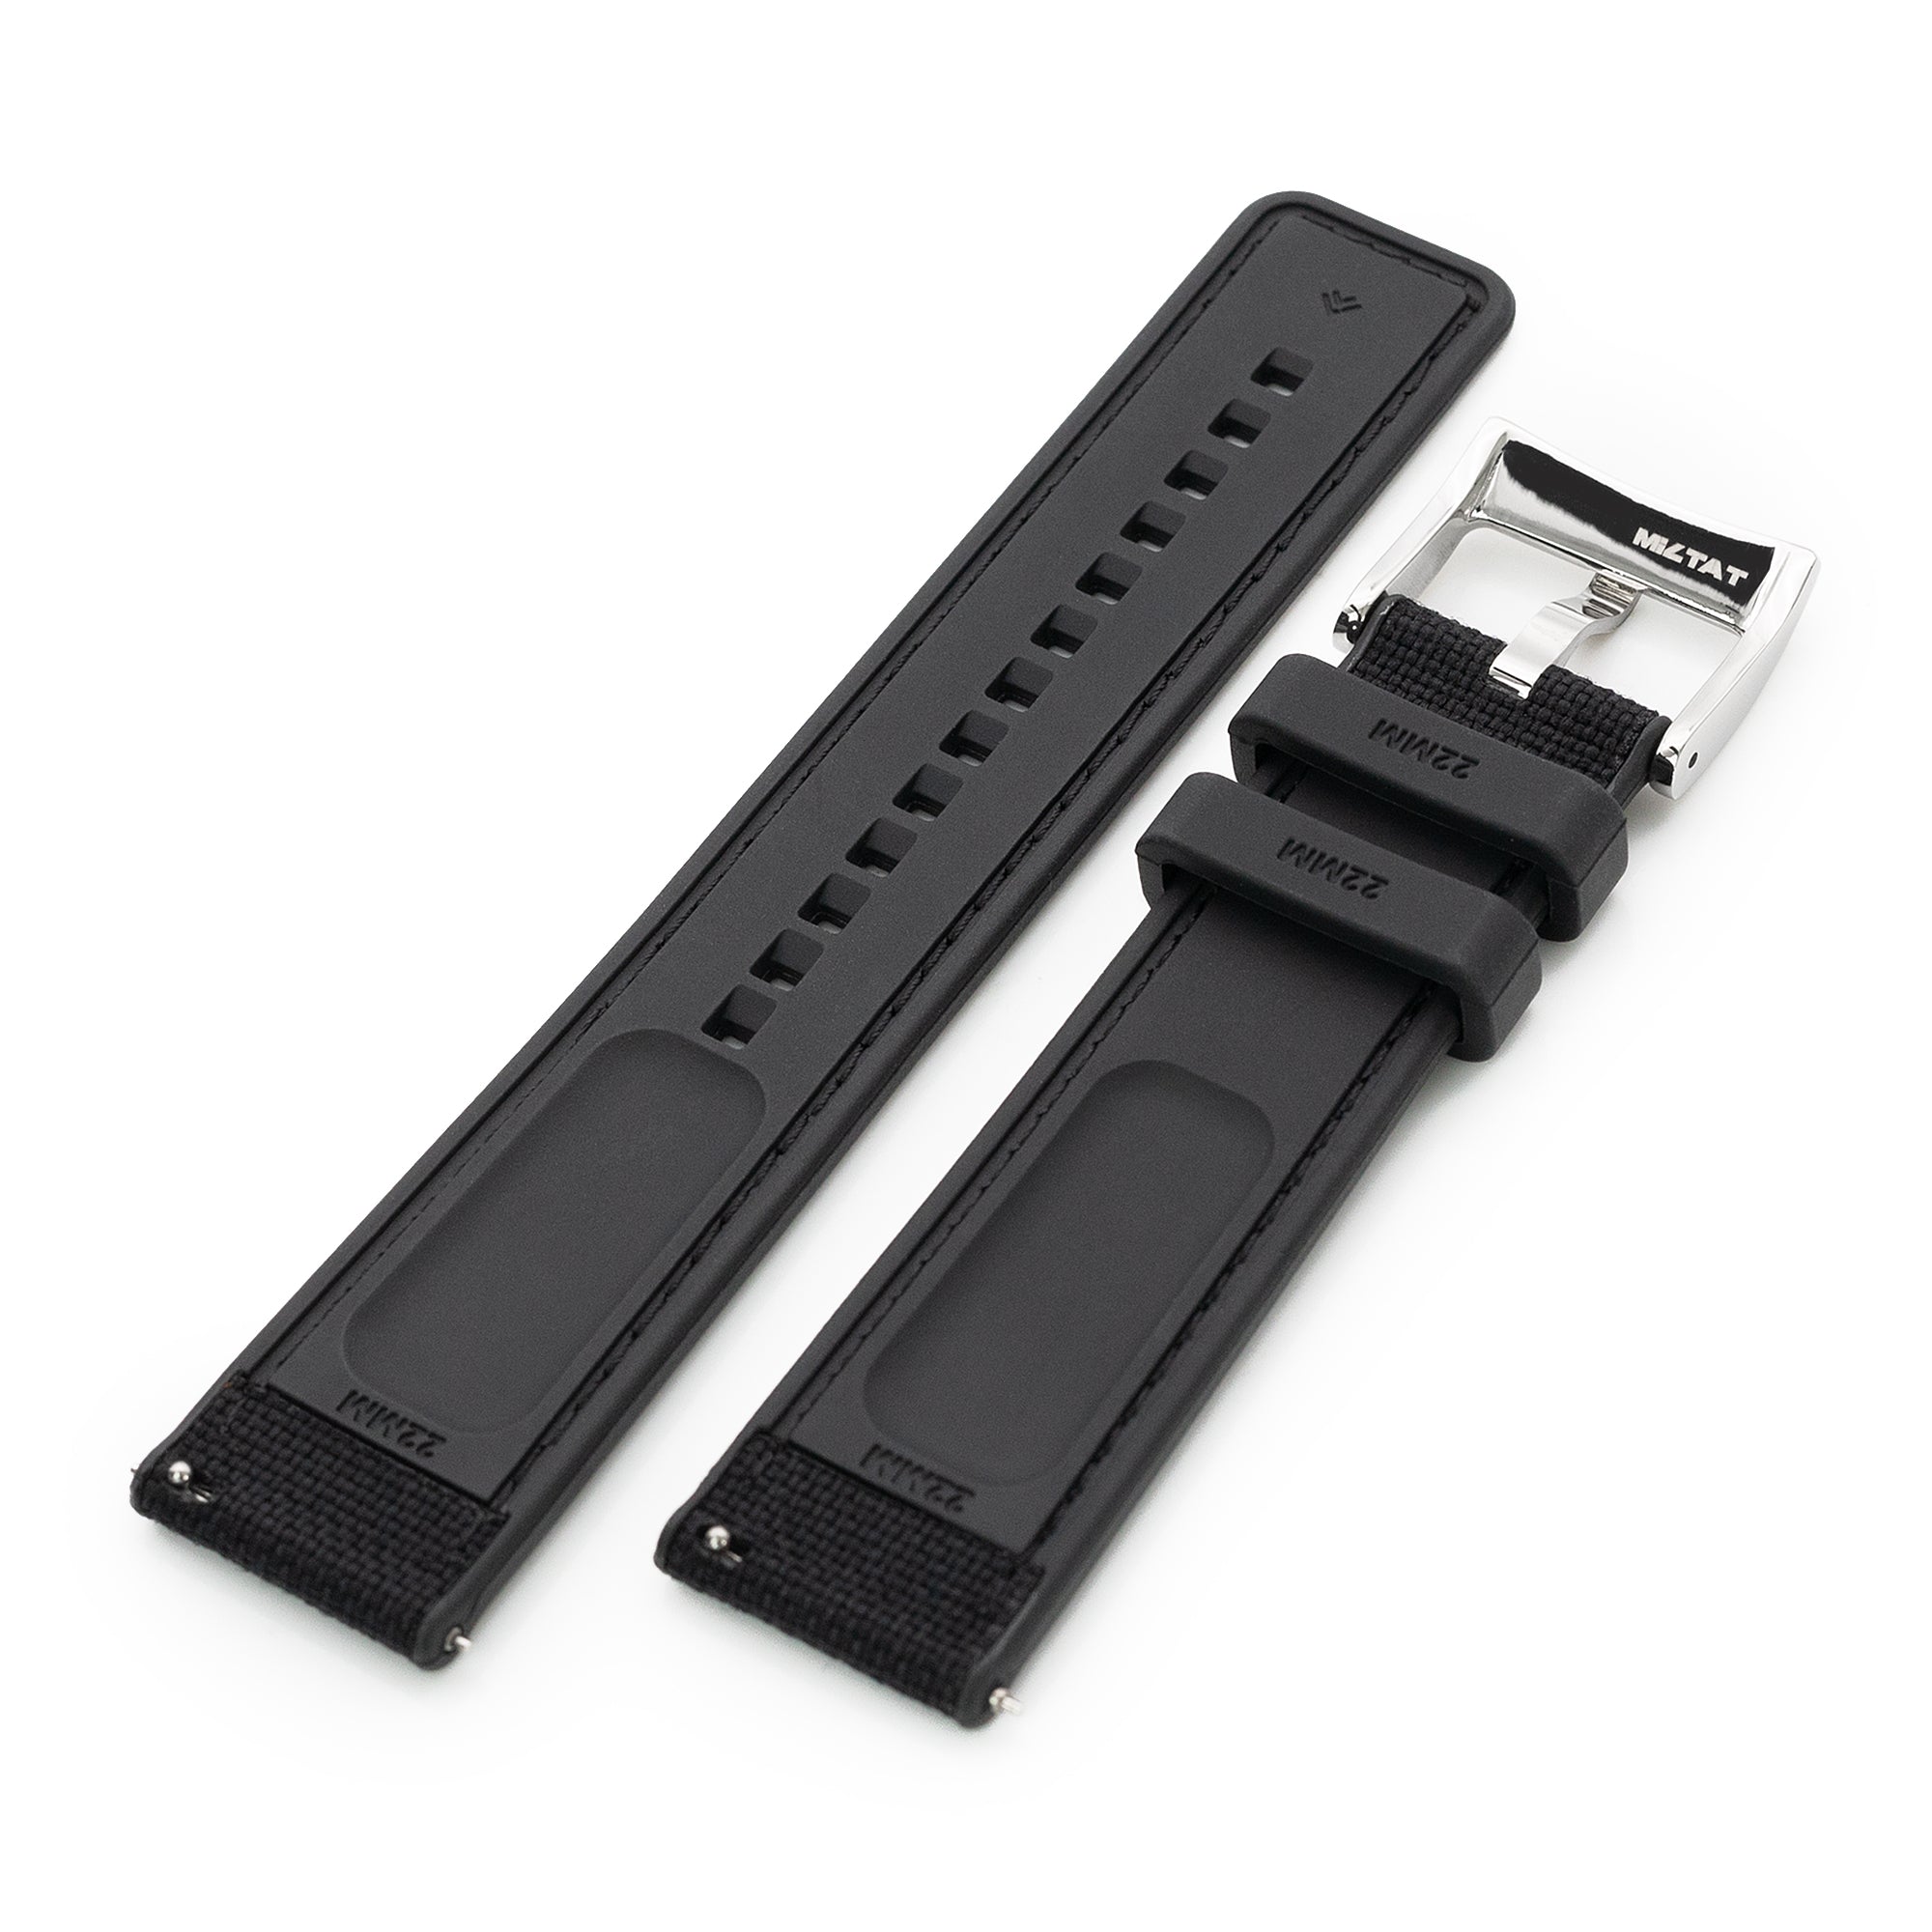 Black Quick Release Hybrid Sailcloth FKM Rubber Sports Watch Strap, 20mm or 22mm Strapcode Watch Bands